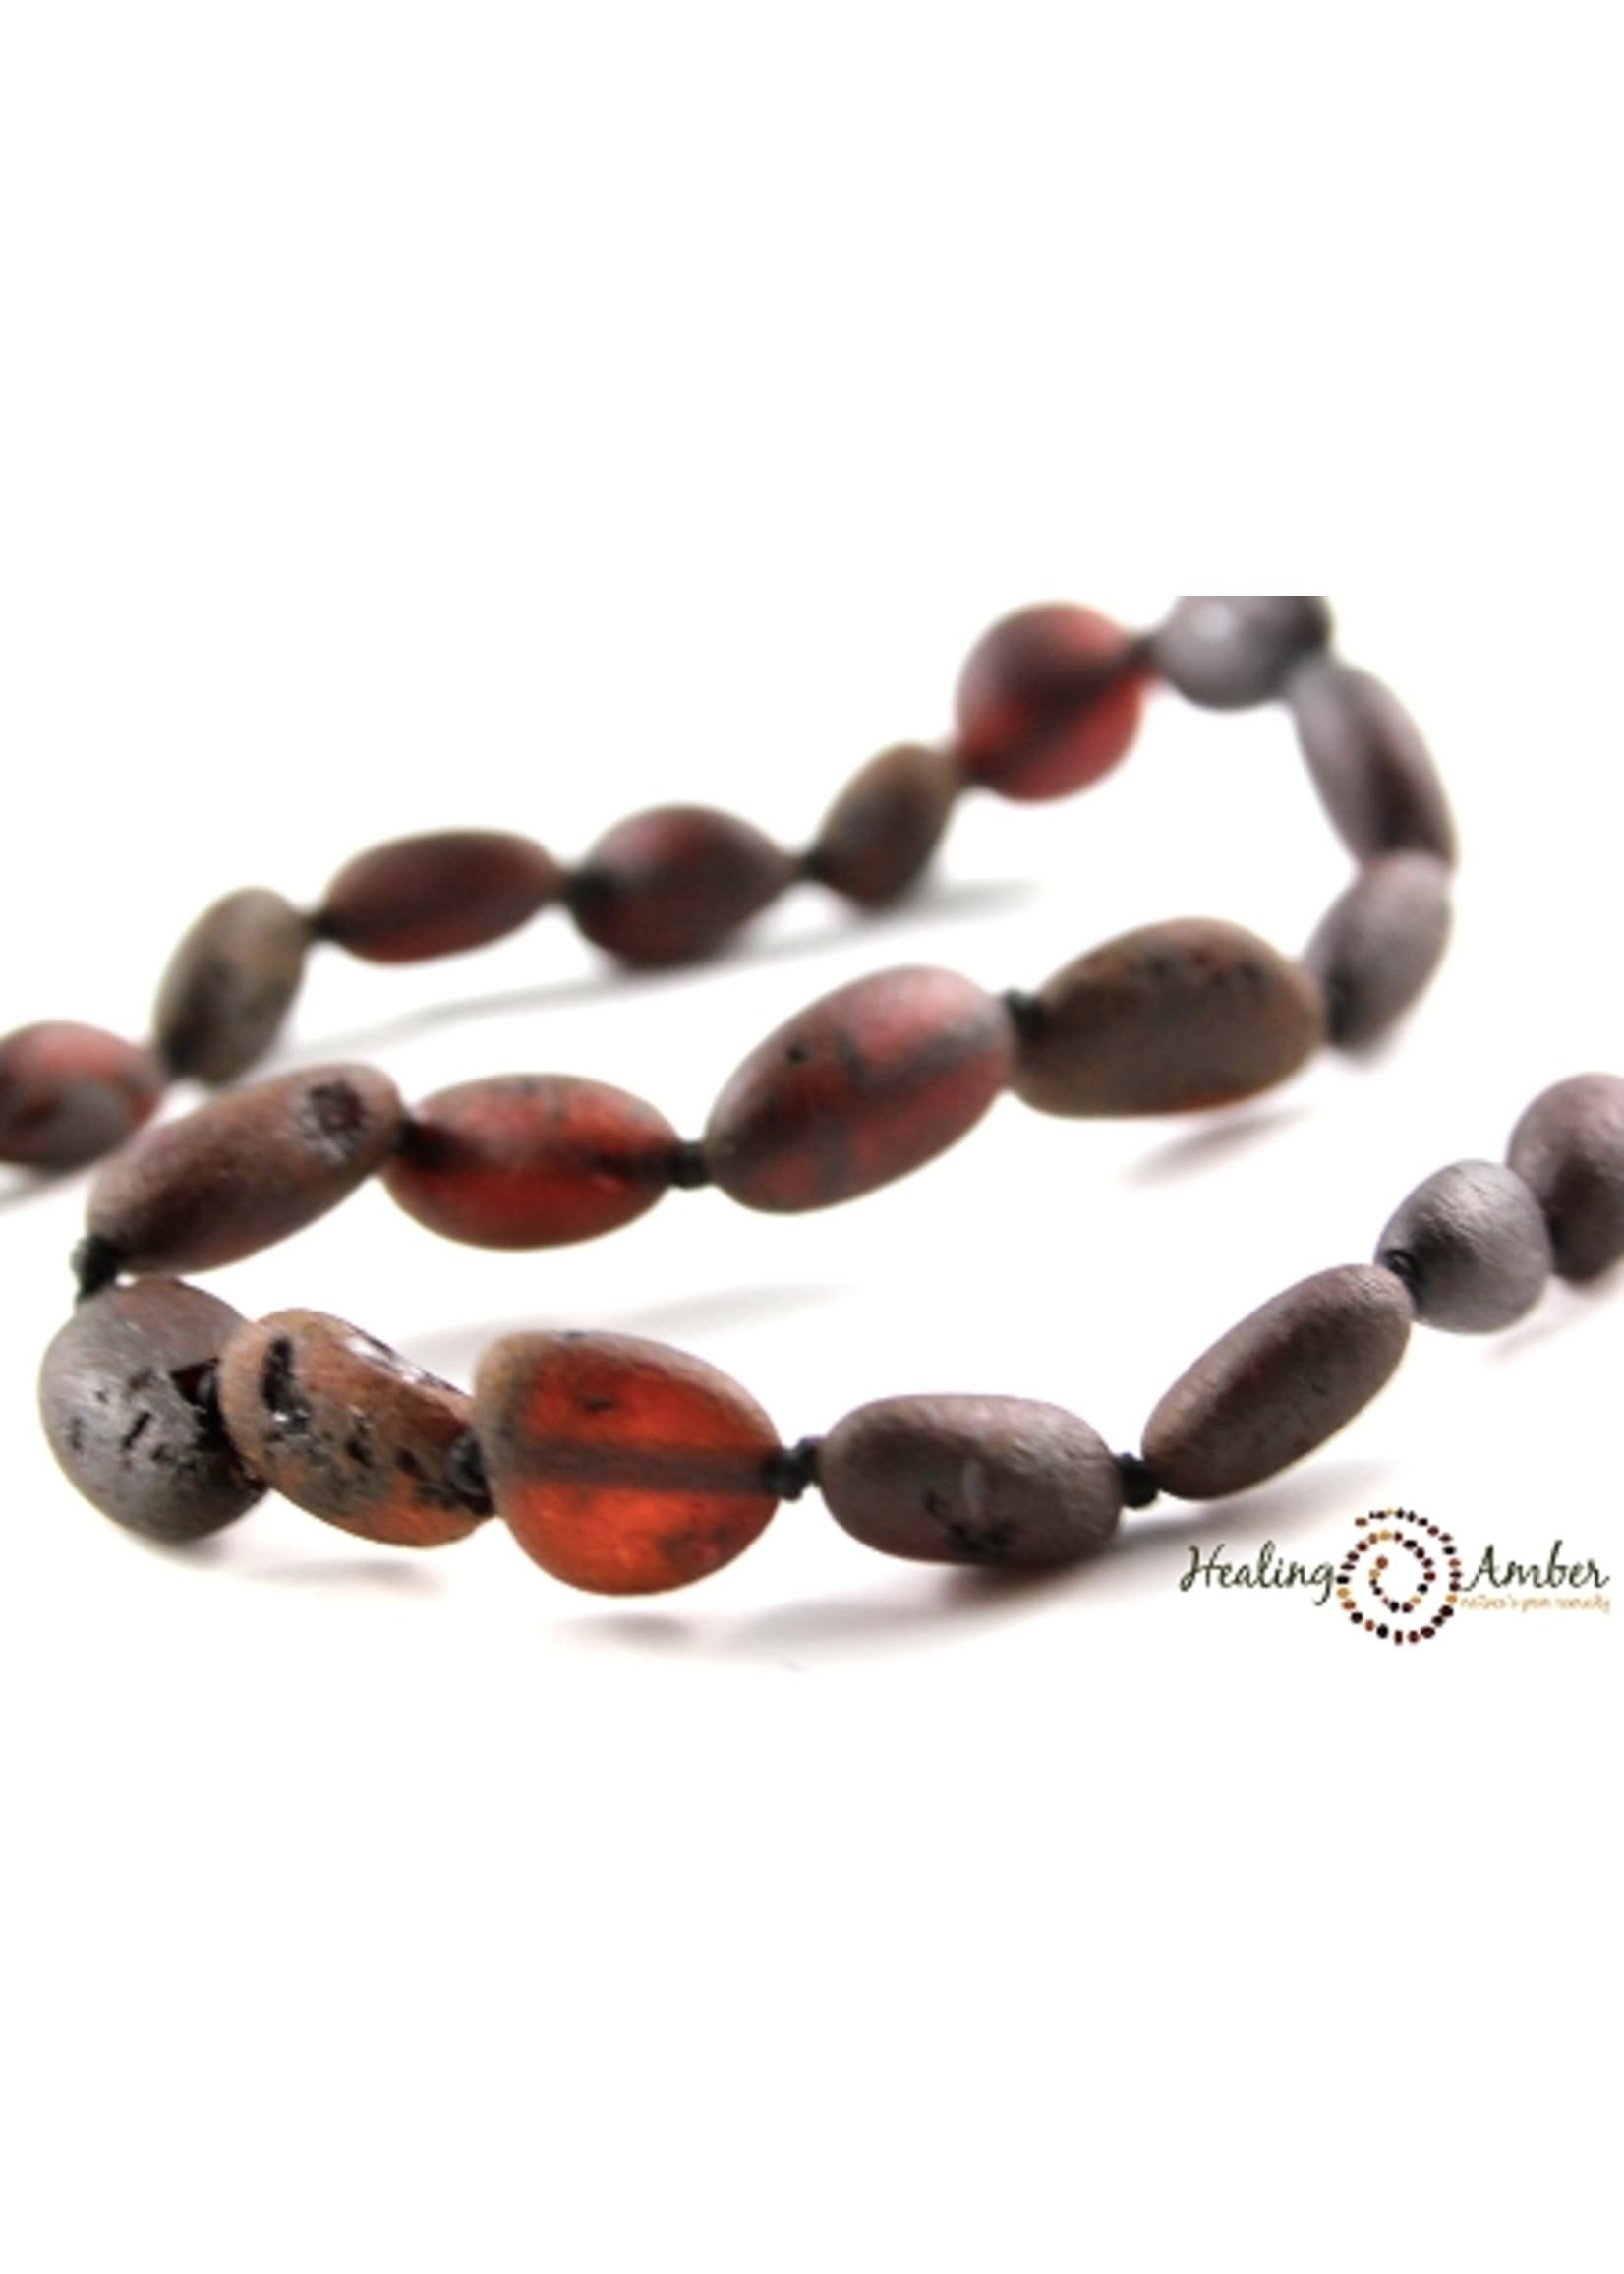 Healing Amber Healing Amber 18" Necklace- Raw Molasses Oval